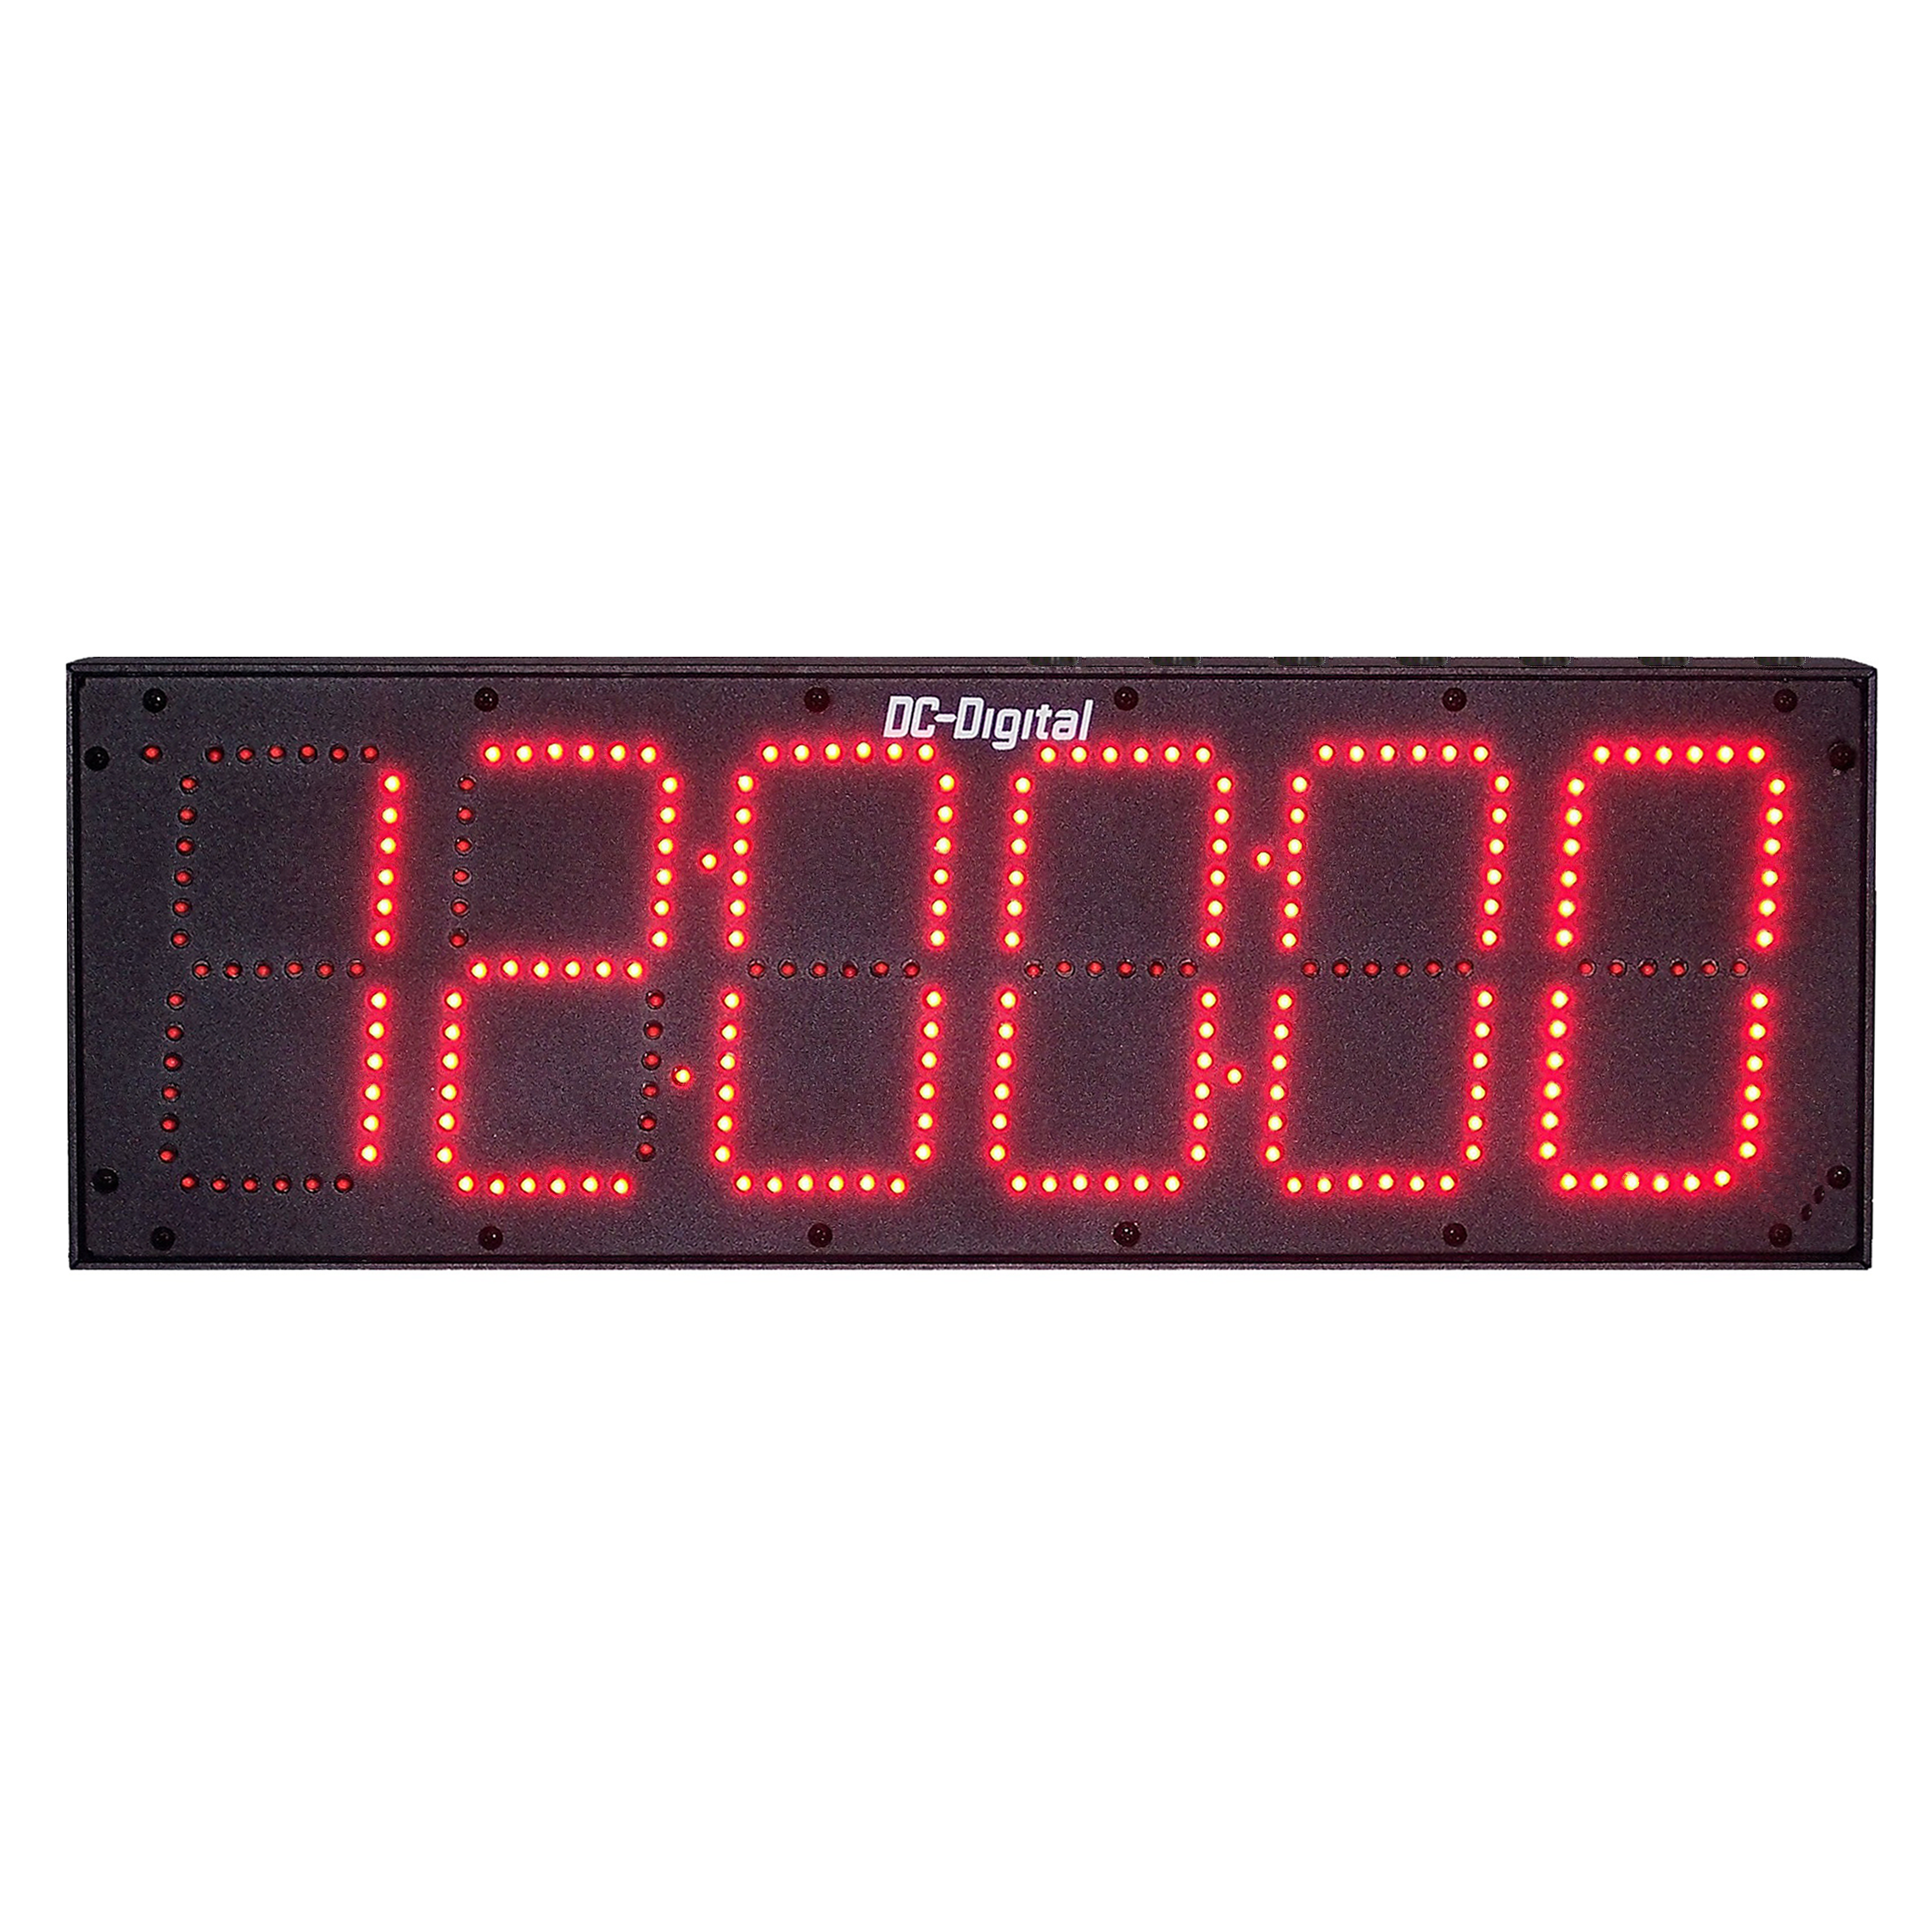 (DC-606N) 6.0 Inch LED, 6 Digit, Network NTP Server Synchronized, Web Page Configurable, Atomic Digital Time of Day Clock (OUTDOOR)